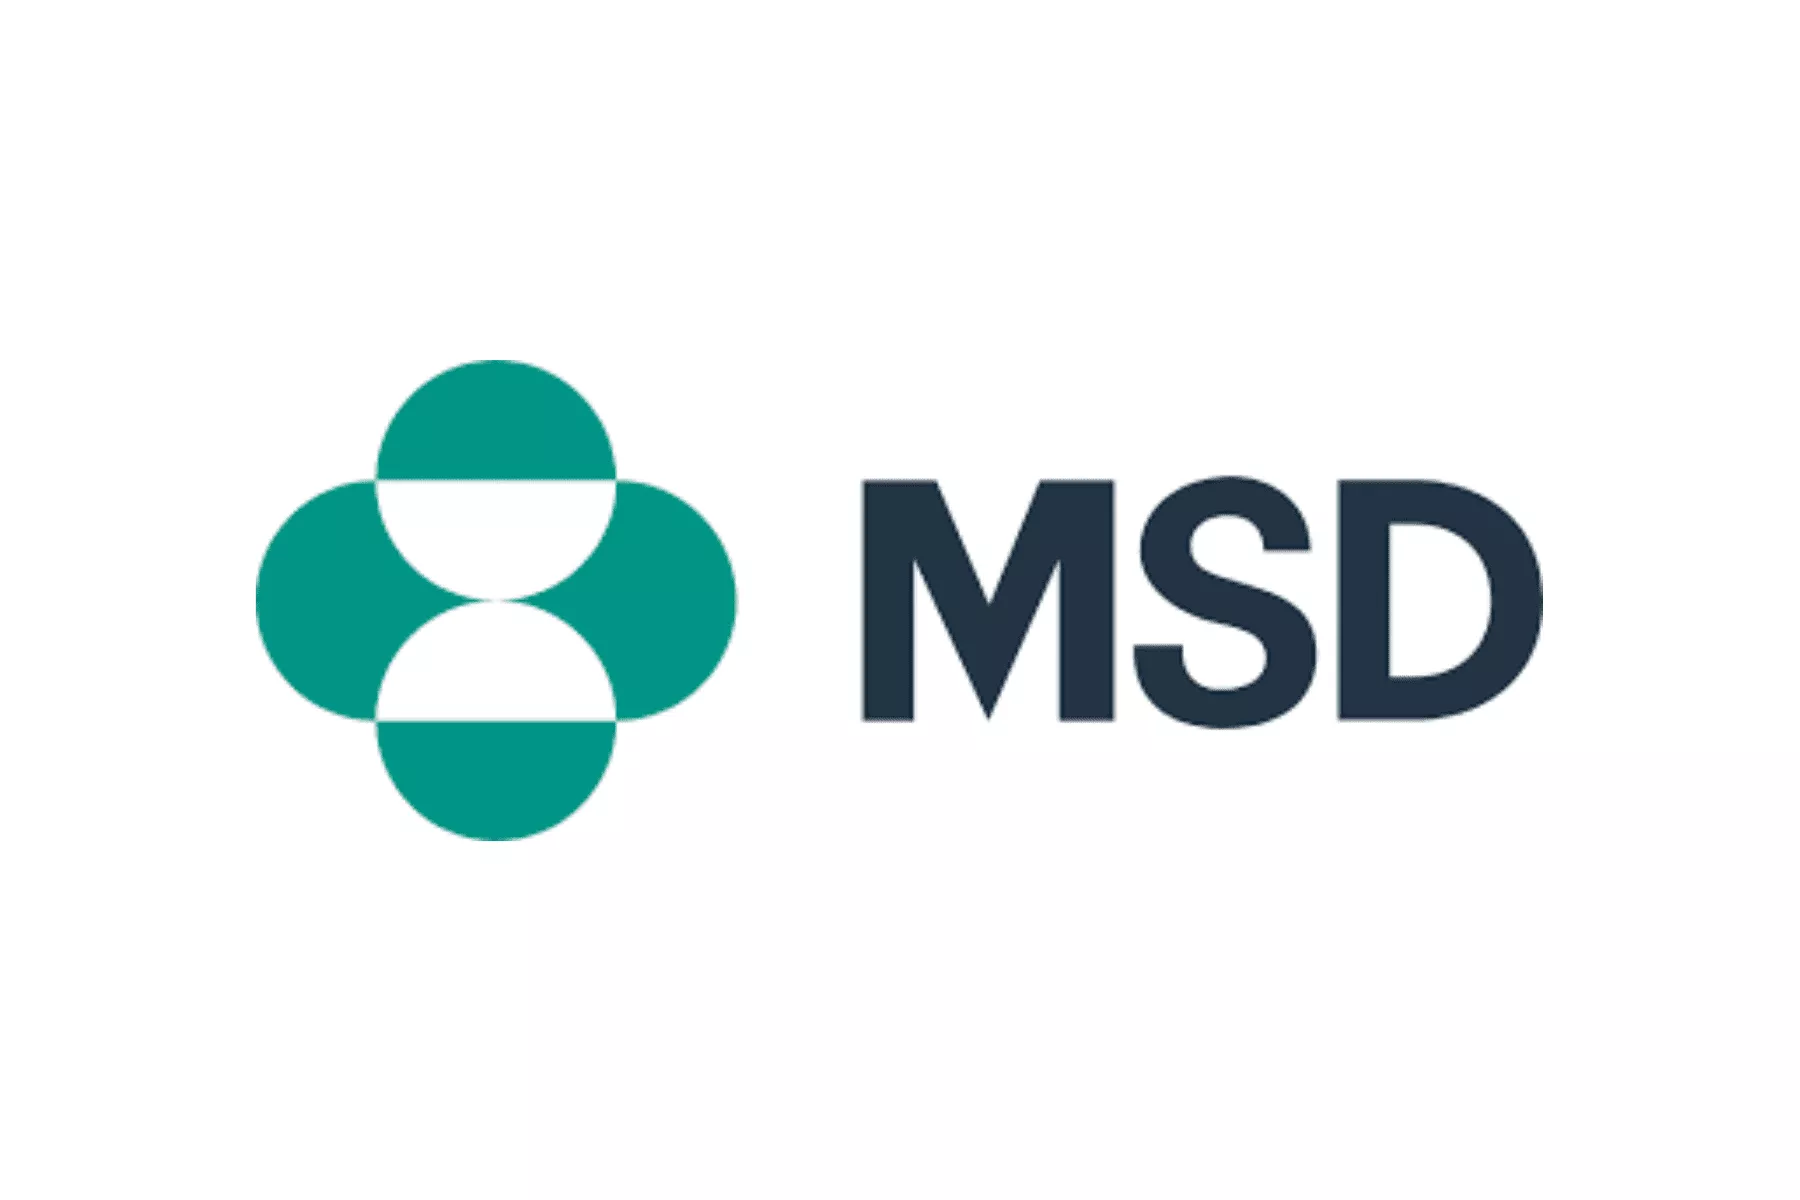 A logo of green overlapping circles next to the letters MSD